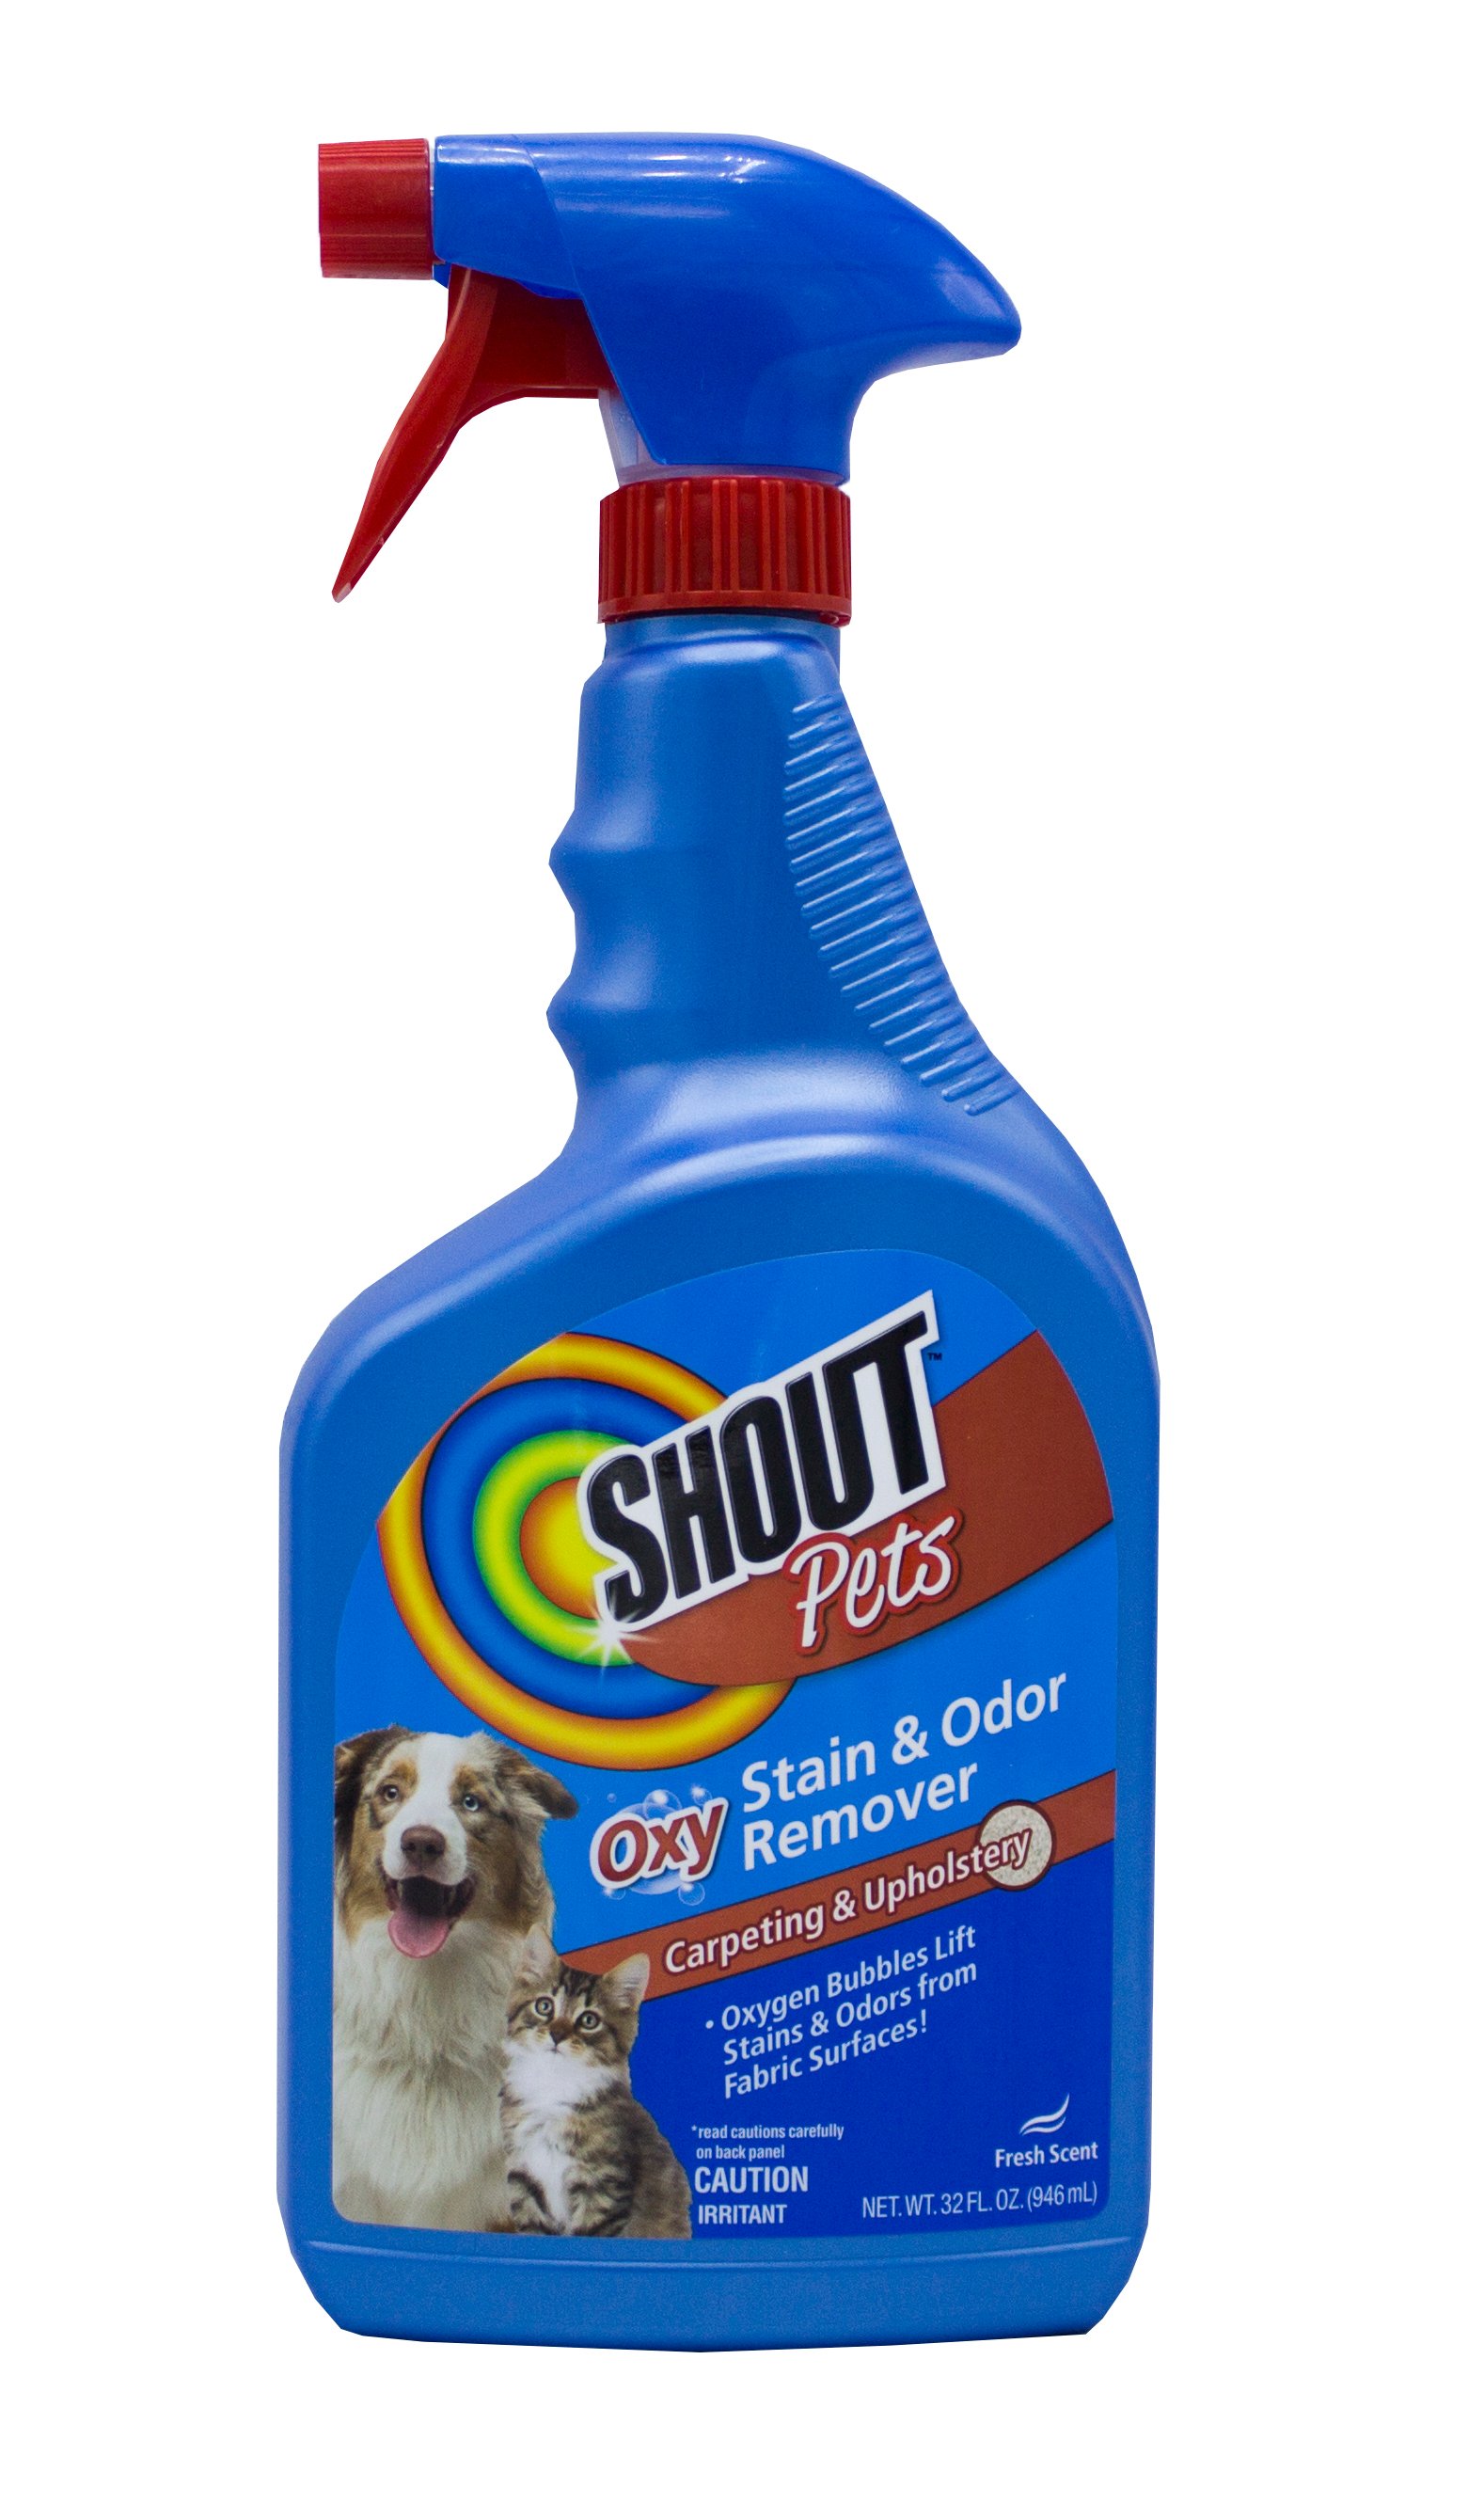 Shout Carpet Aerosol Foam with Oxy for Pet Stains and Odor, 22 fl. oz.